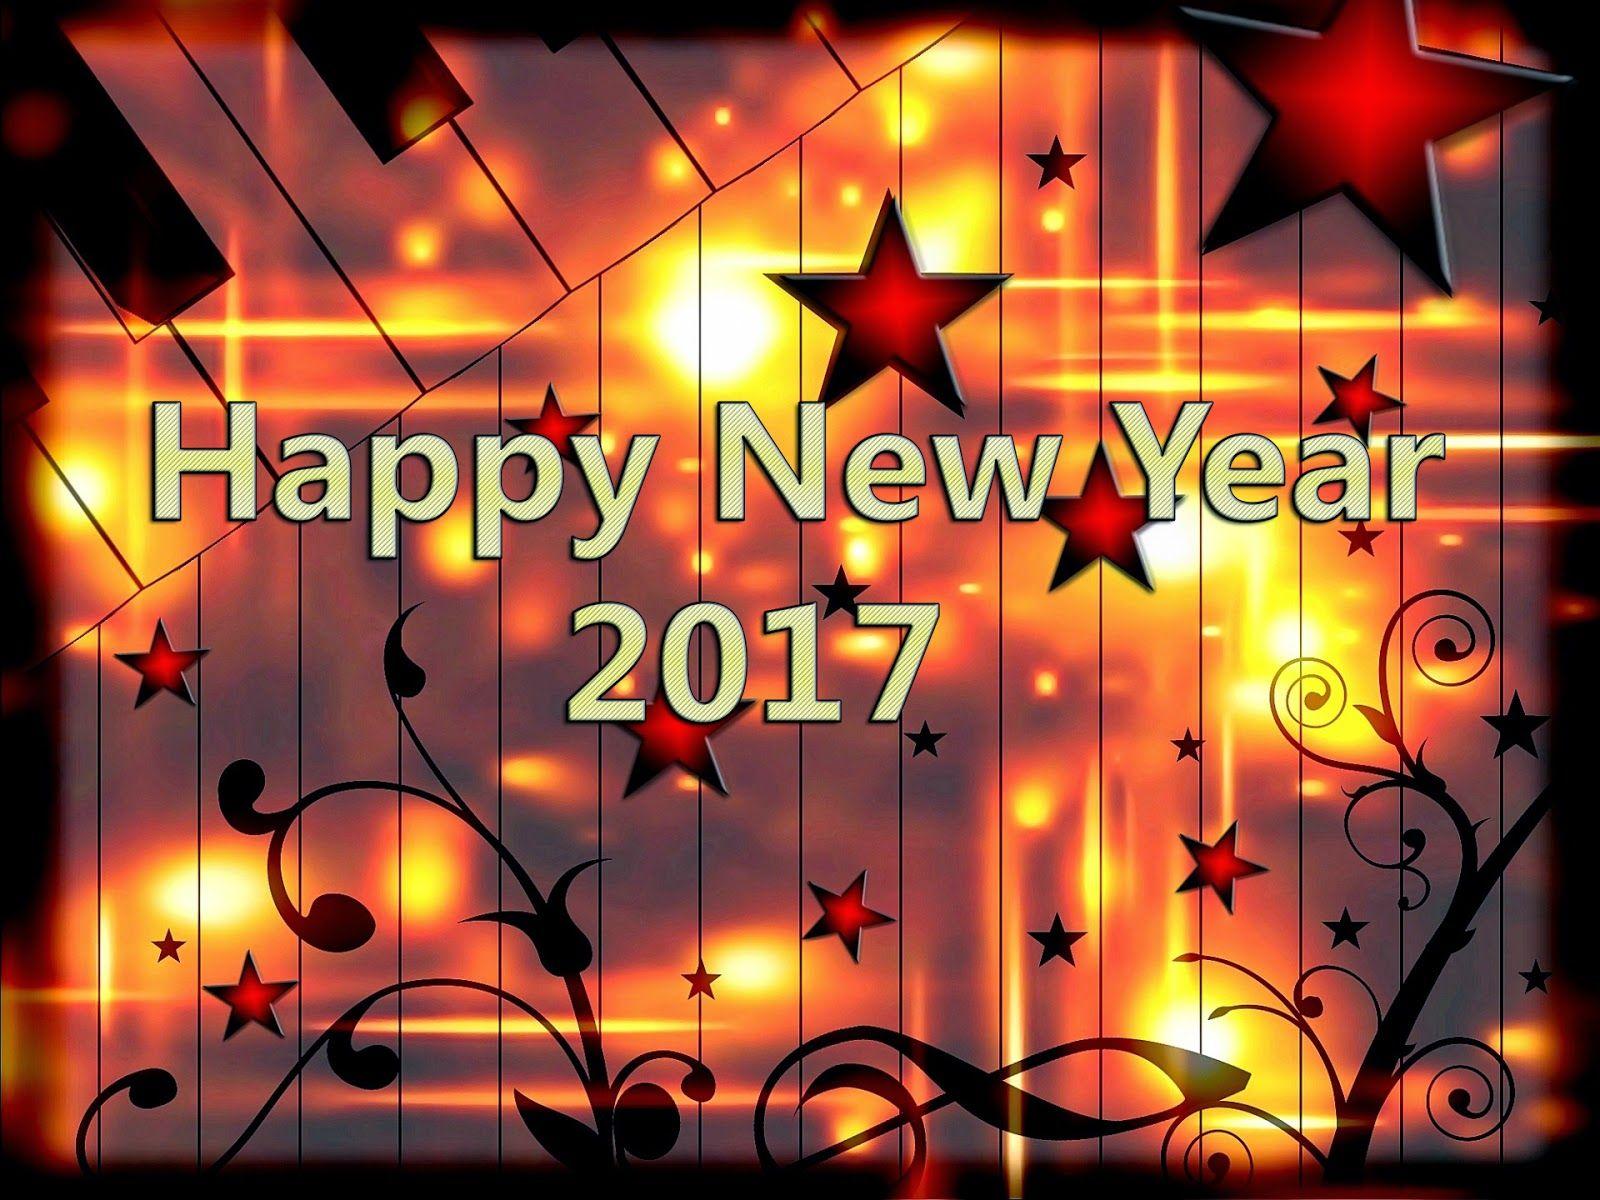 Free Happy New Year 2017 Image HD collection Happy New Year 2017